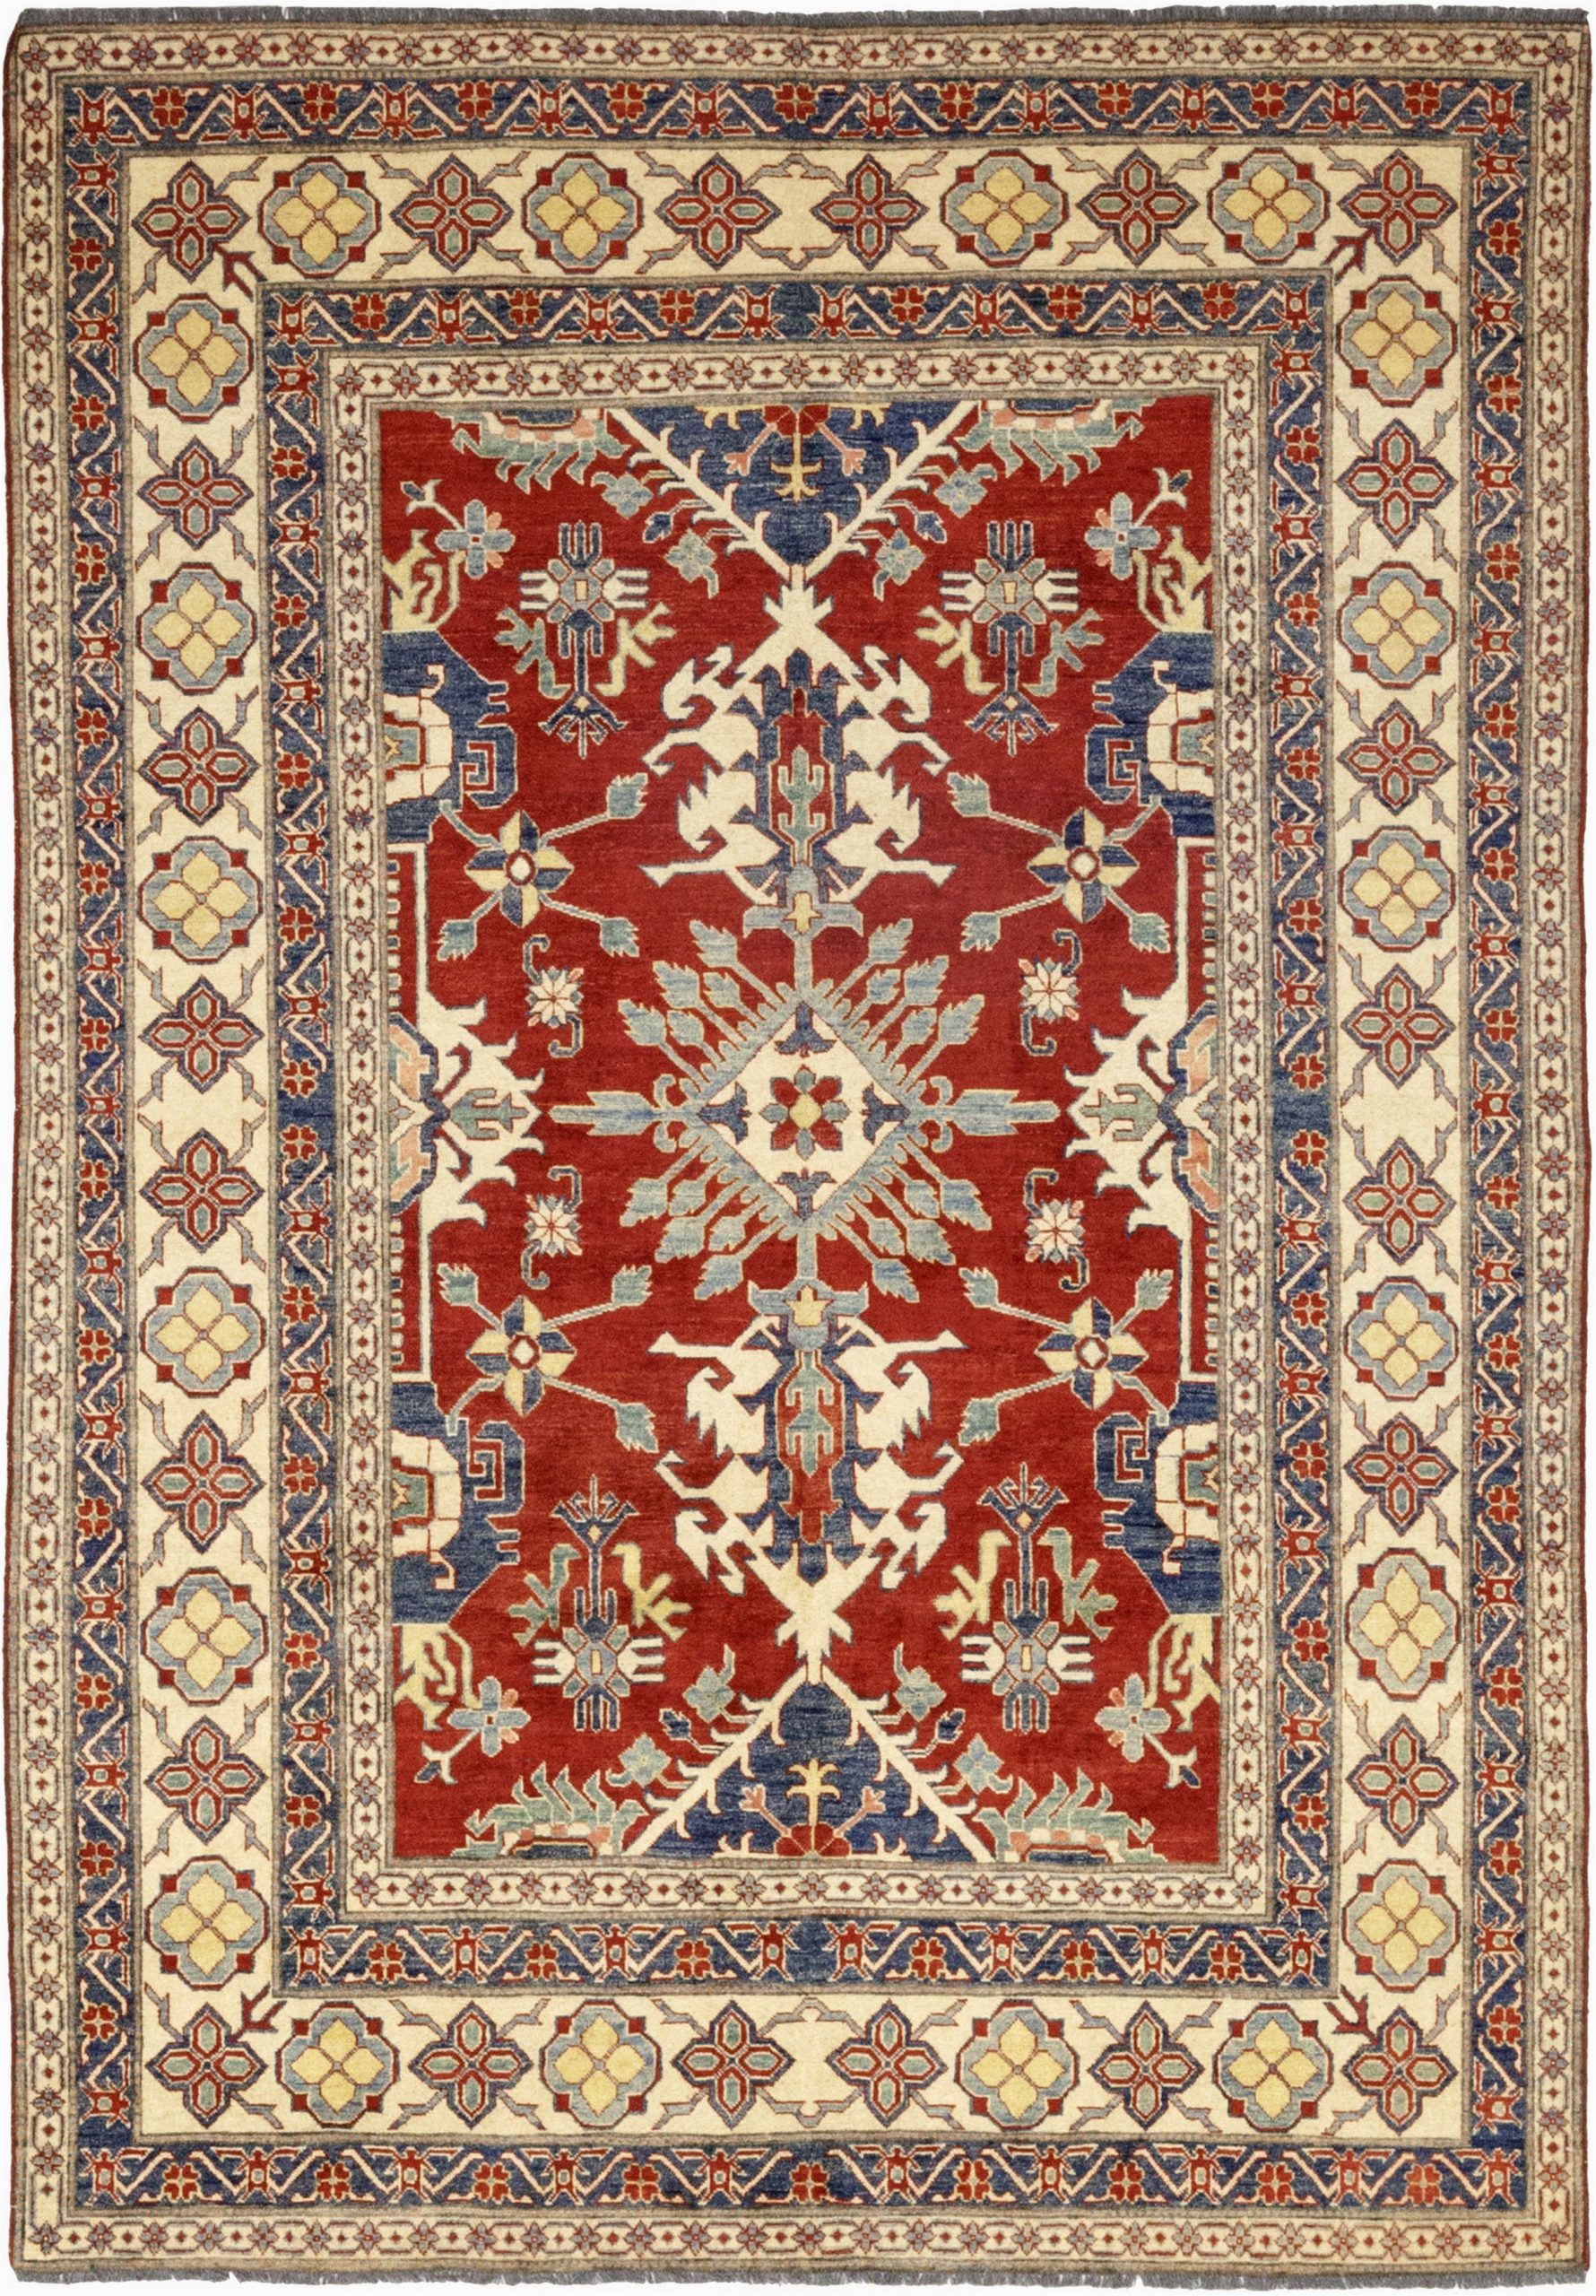 Lowes area Rugs 8 by 10 â Lowes area Rugs Clearance – Modern Rugs Popular Design